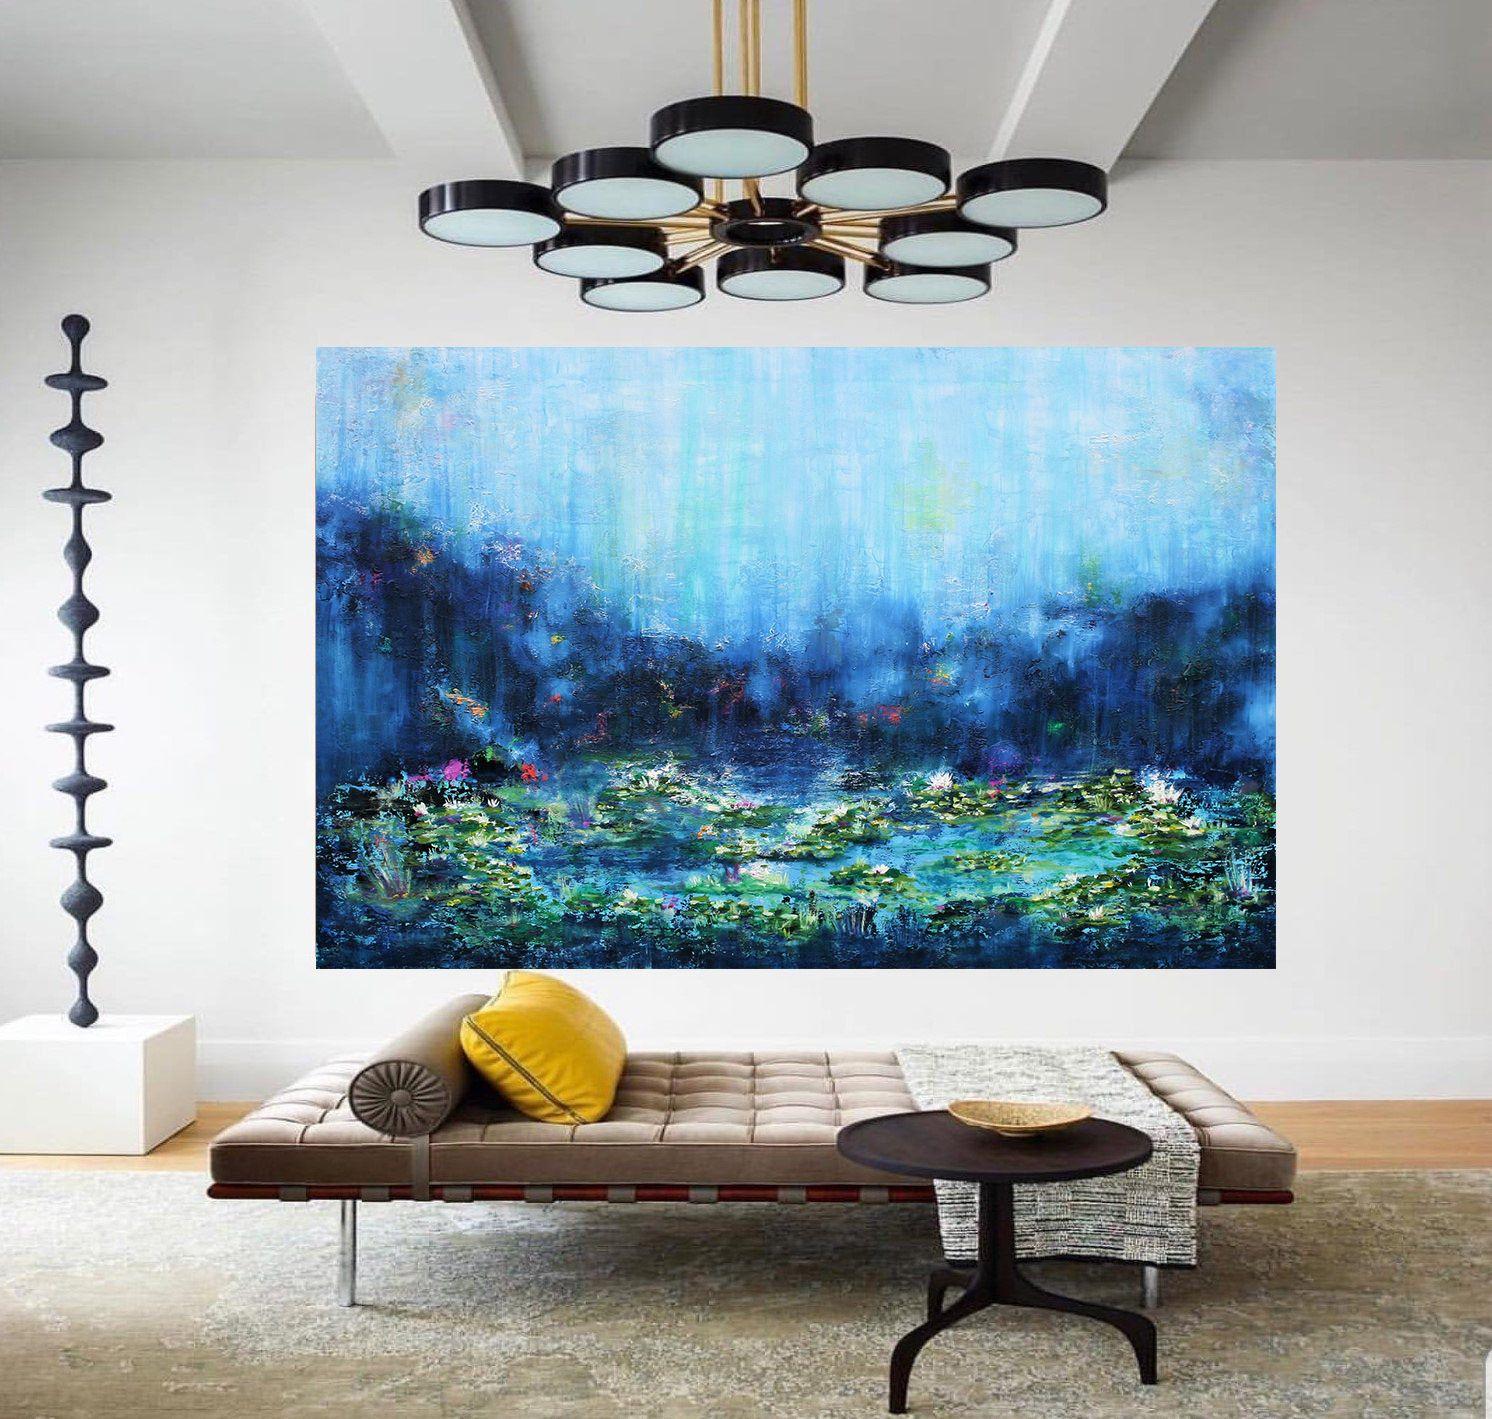 Large Water Lilies 120 x 80 cm Oil Painting, Painting, Watercolor on Canvas - Impressionist Art by Susan Wooler